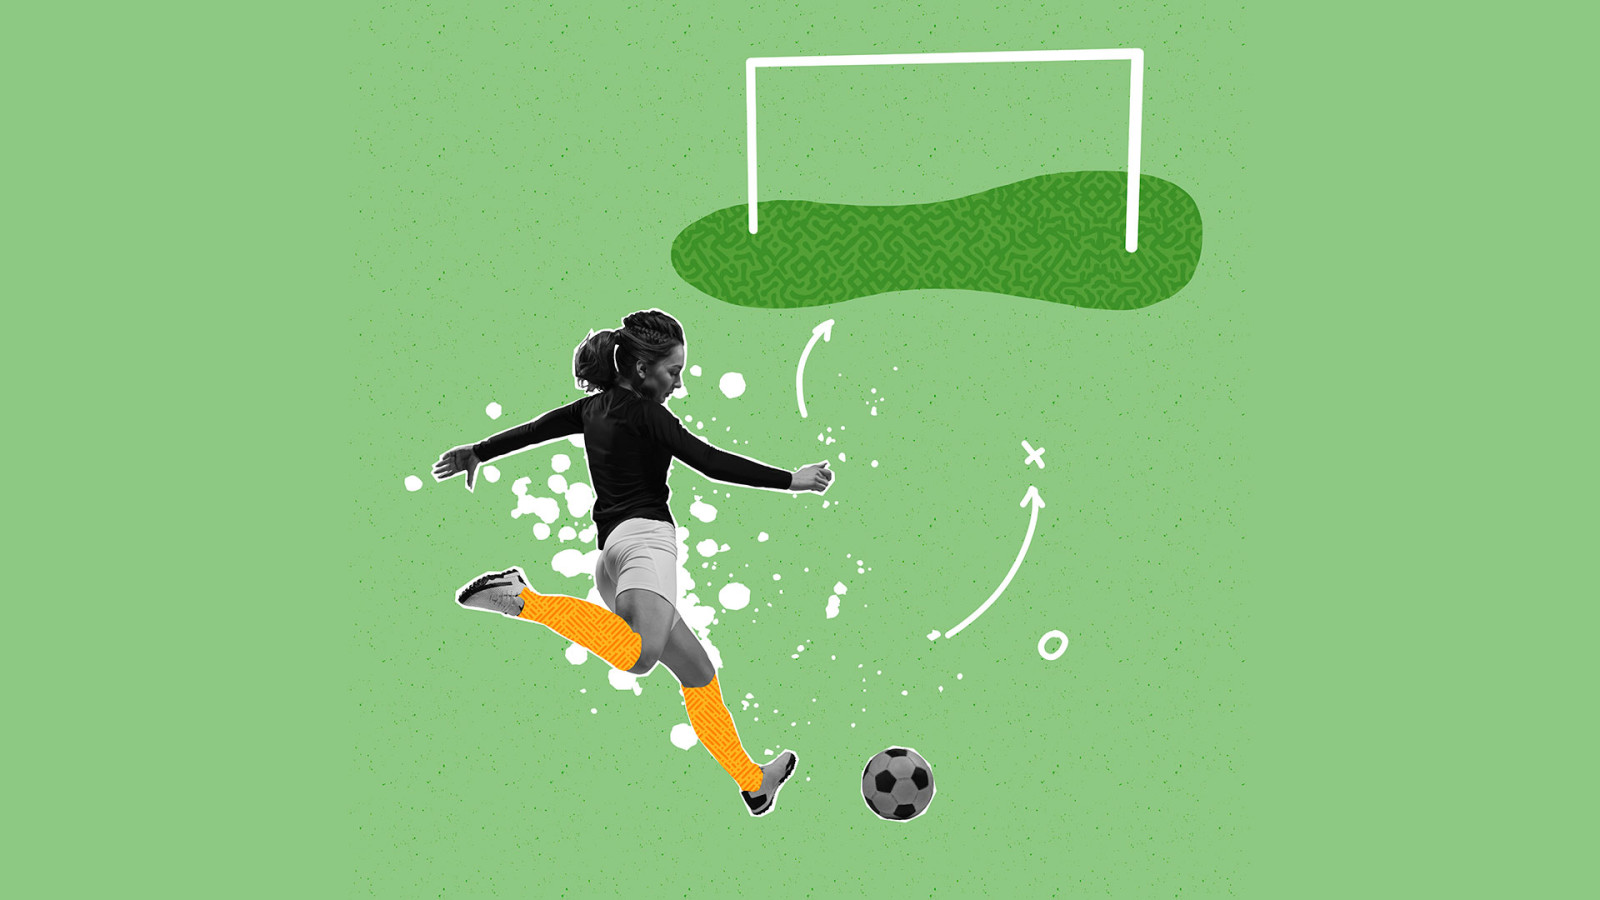 Energetic female soccer player playing football over light background with drawings, sketches.